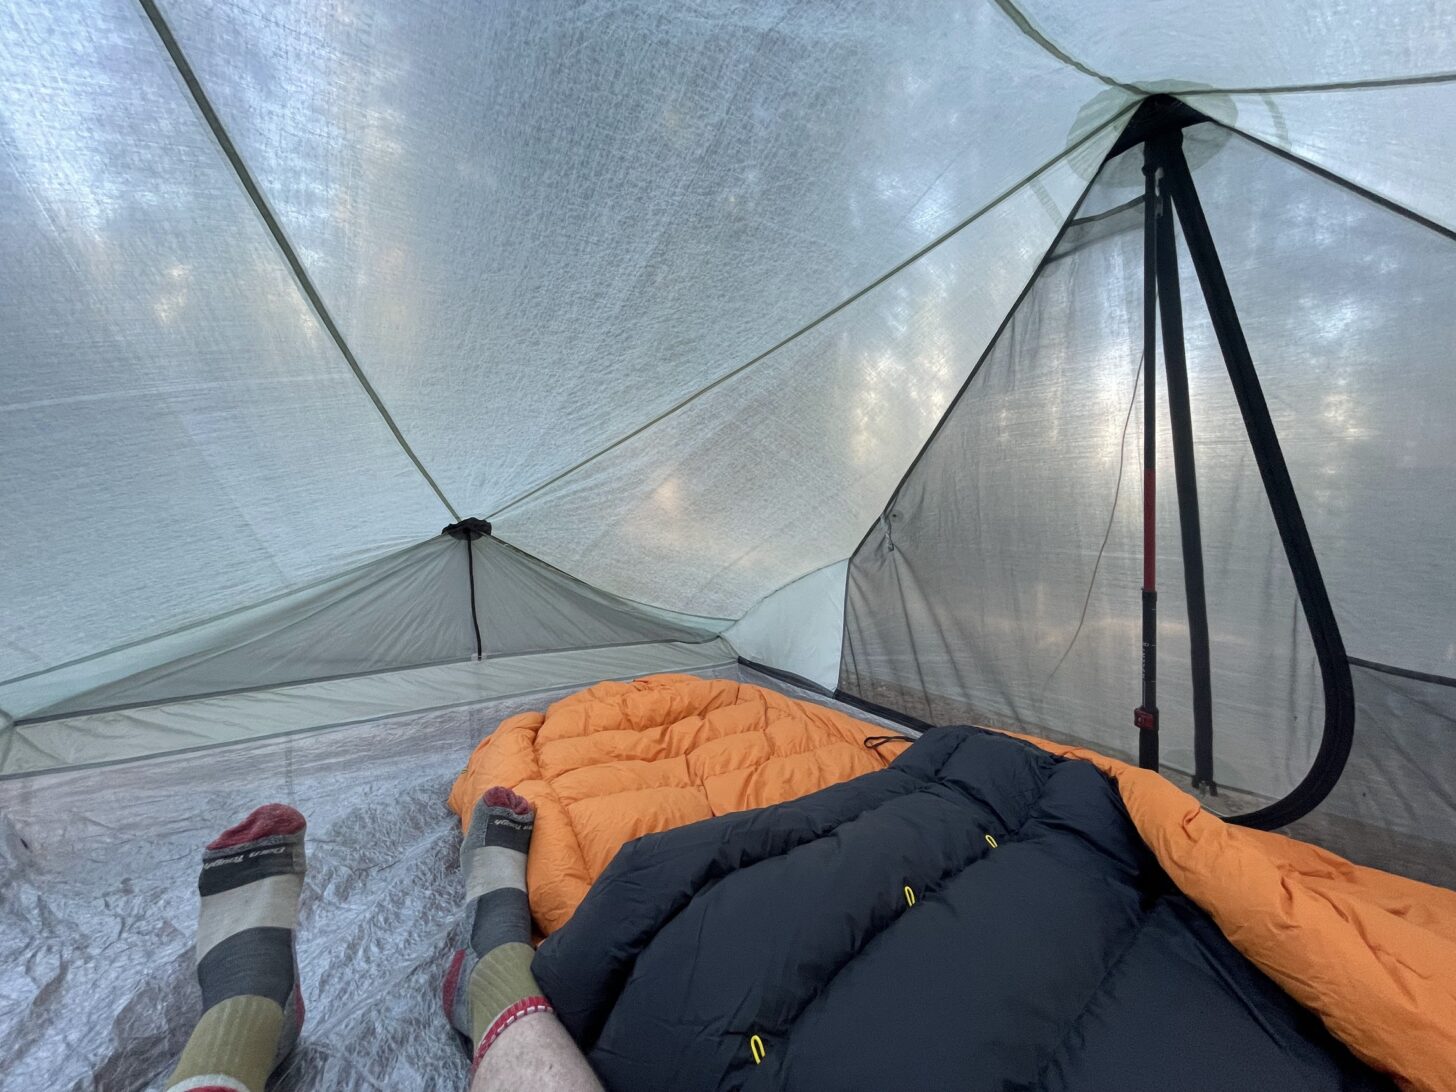 A shot of the inside of the of the Dipole 2, with feet and a sleeping pad also in the shot.